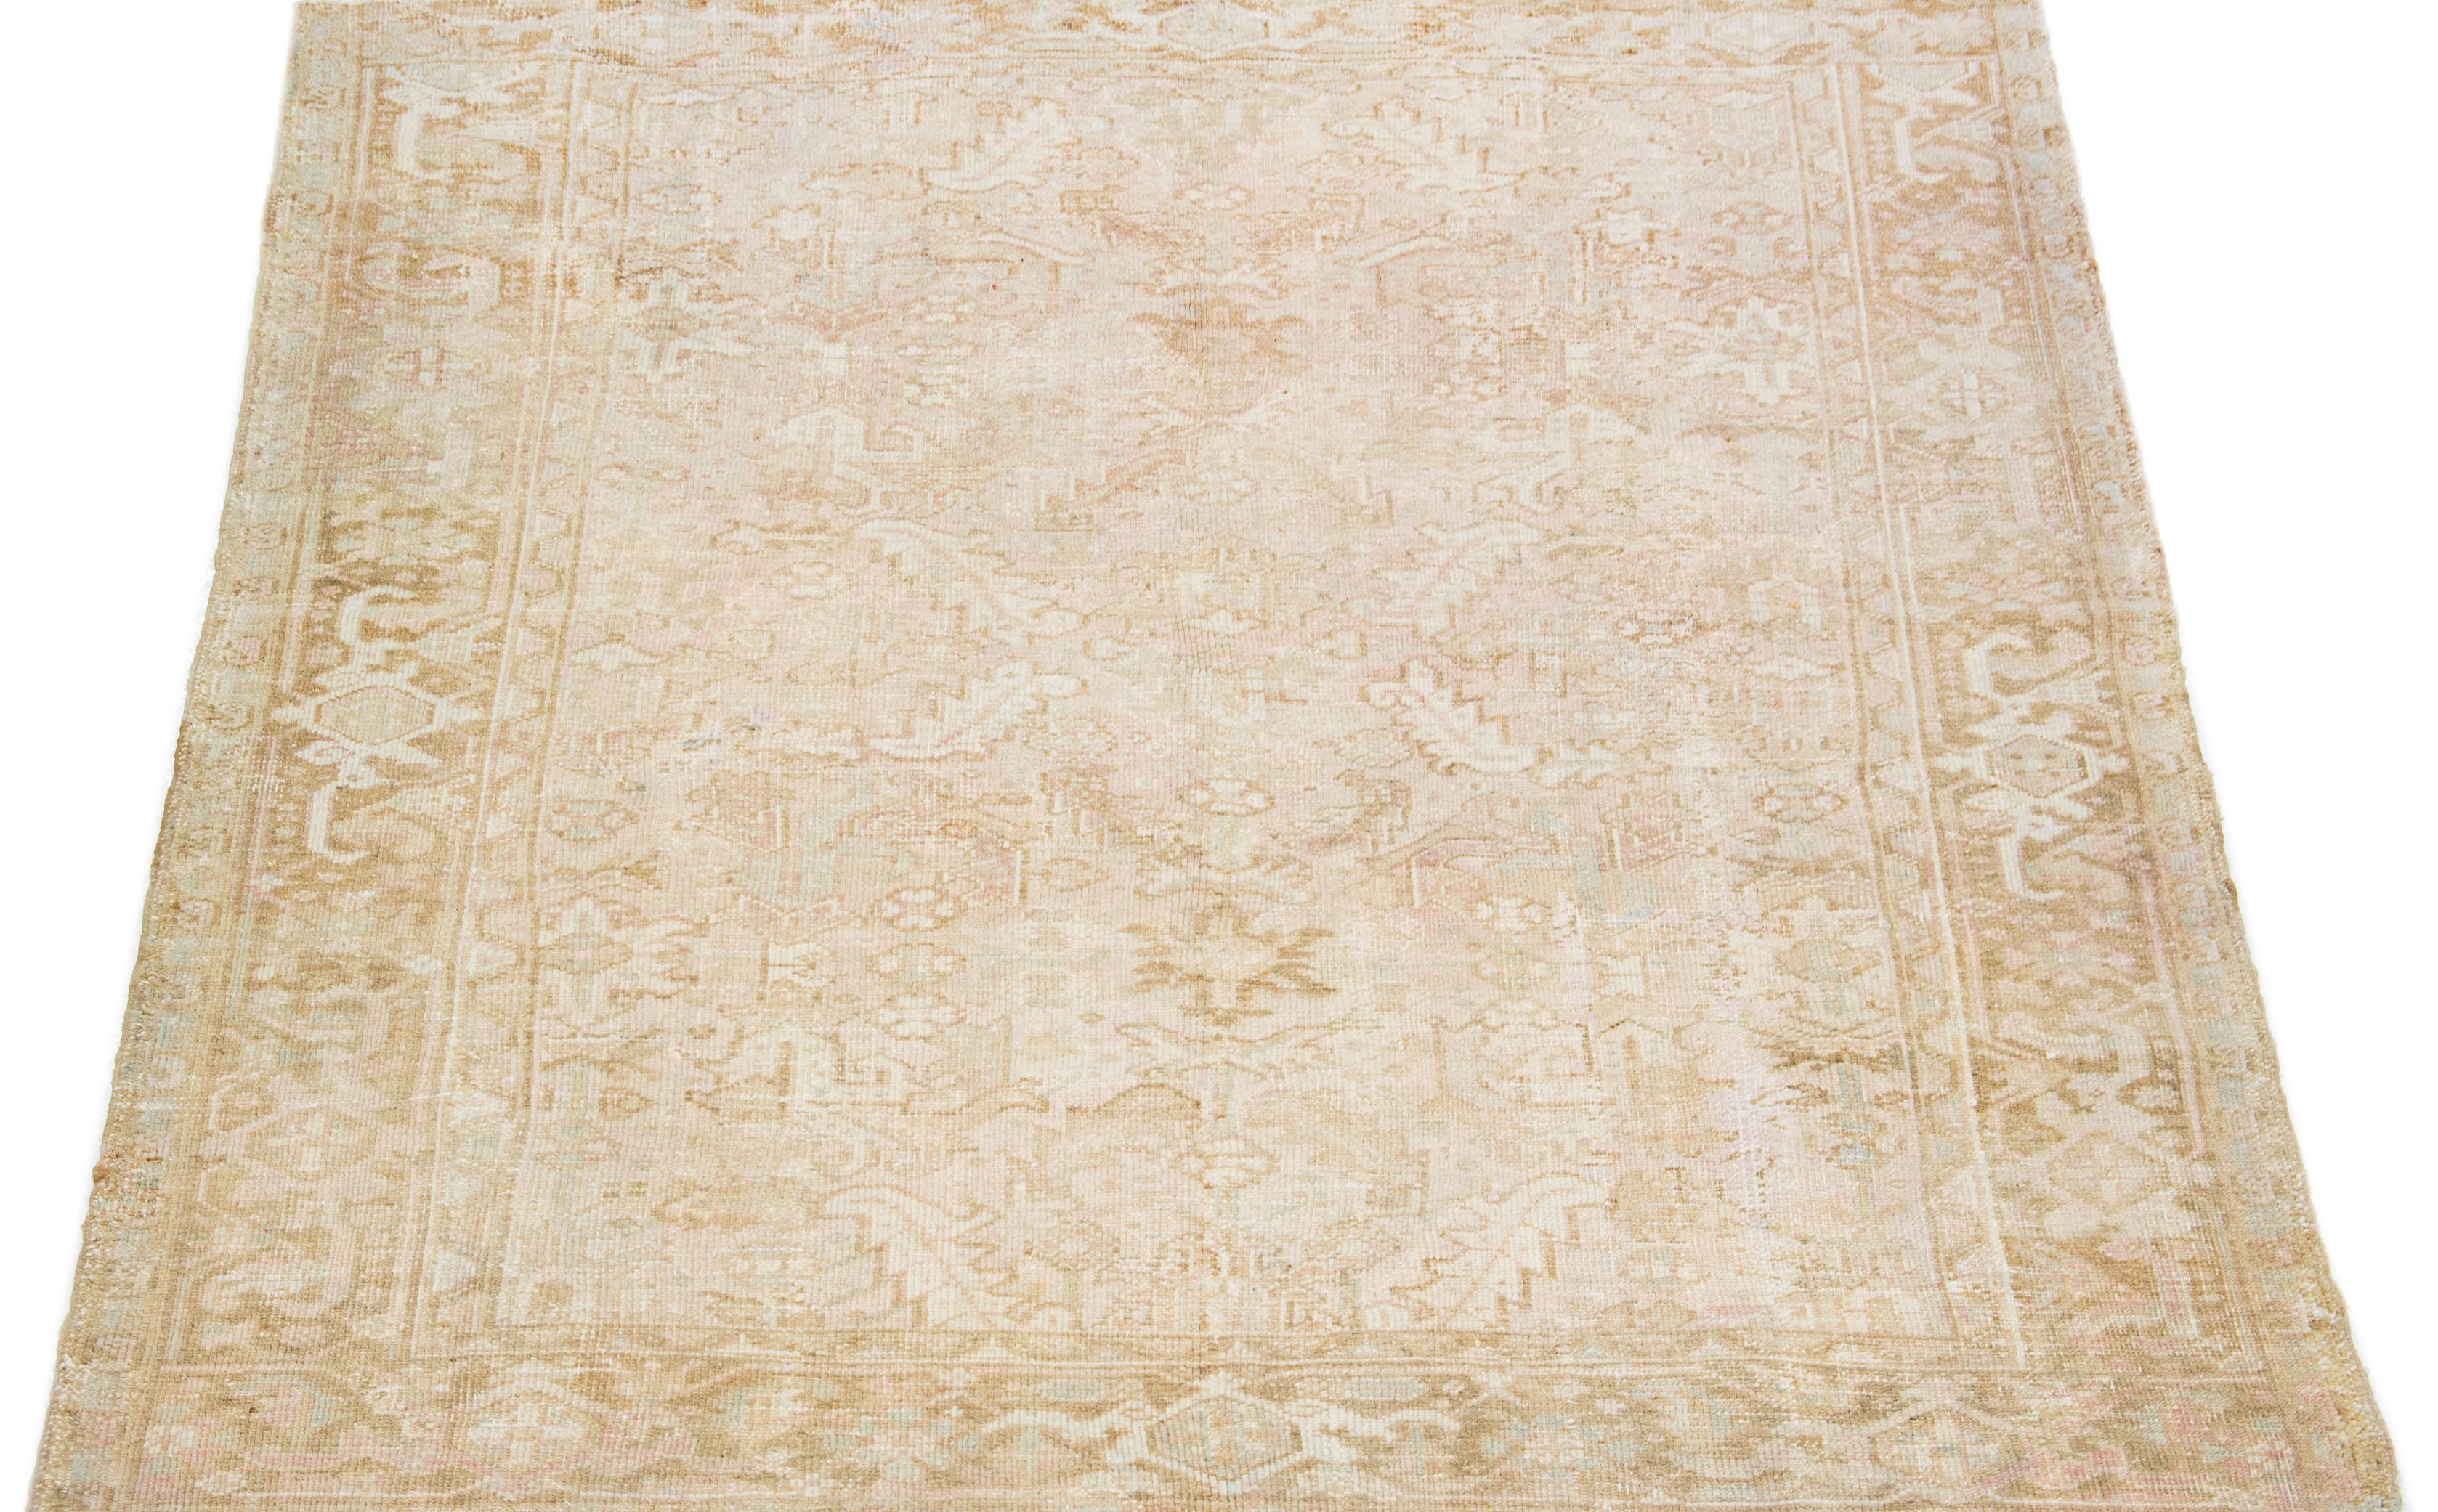 This Persian rug boasts a splendid all-over design with an eye-catching geometric floral pattern in shades of blue and brown set against a soft peach and beige field. Using premium hand-knotted wool, this antique Heriz rug radiates eternal class and